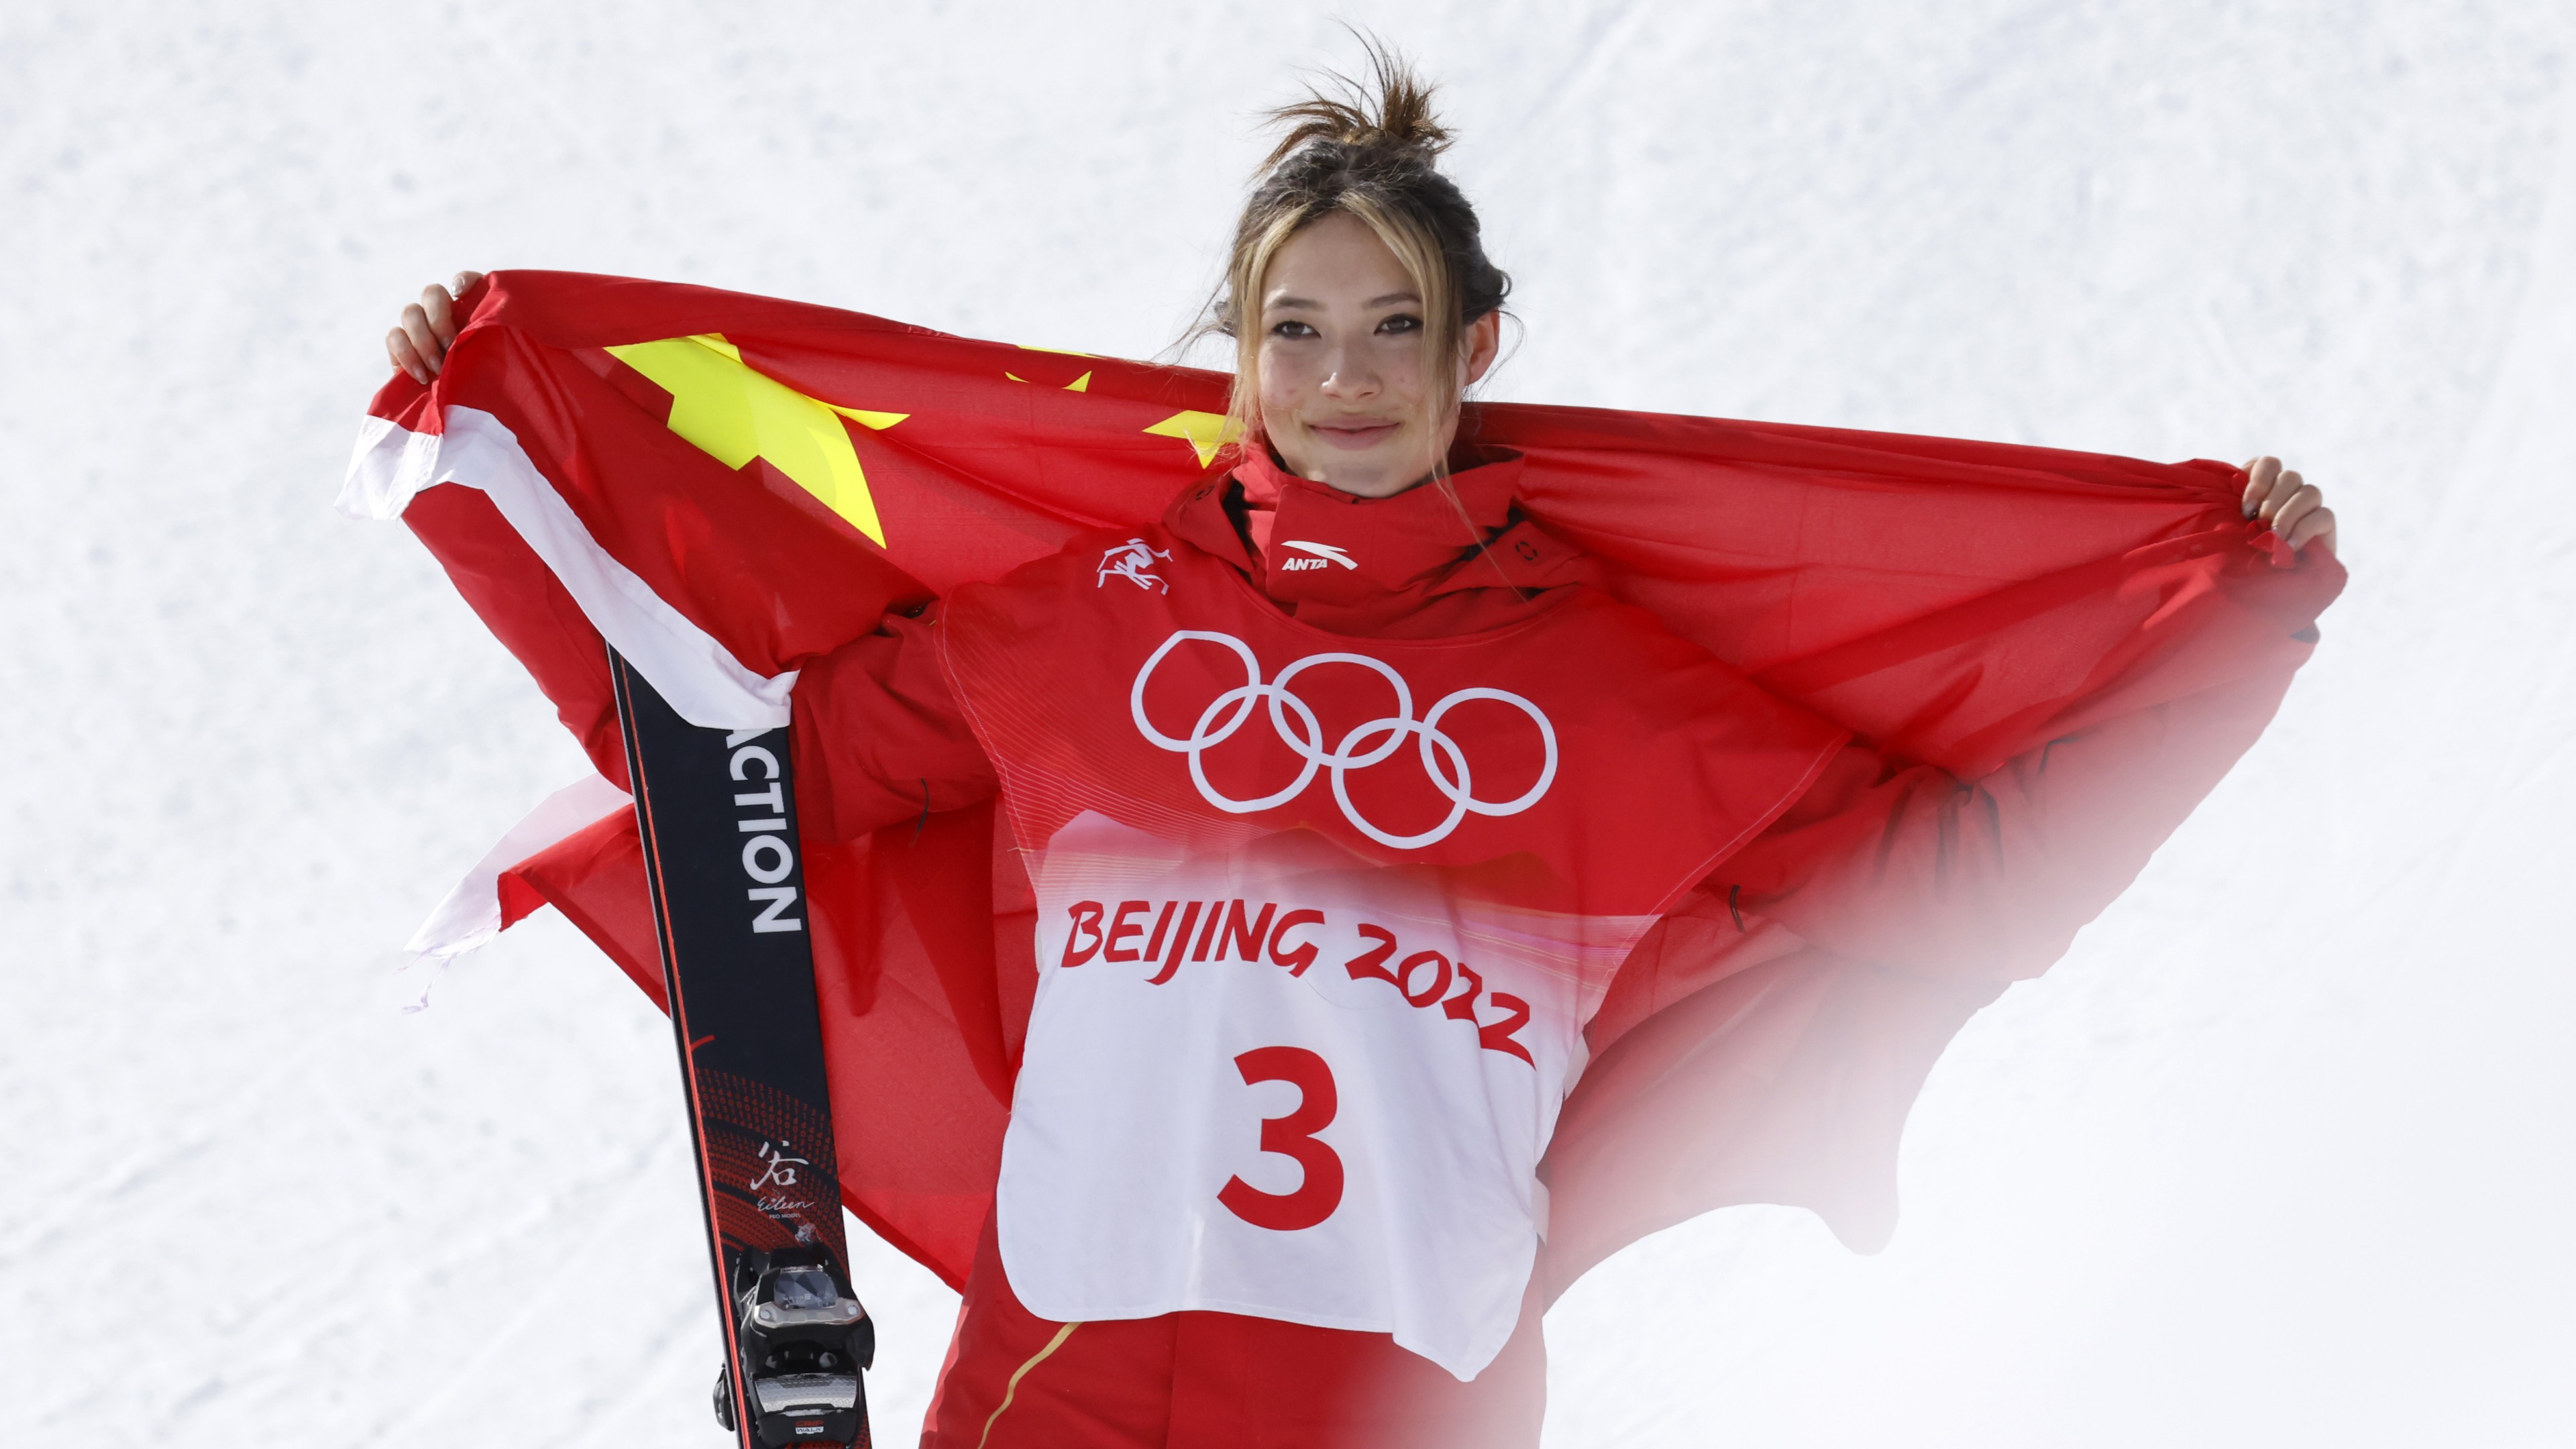 BEIJING, CHINA - FEBRUARY 15 : Ailing Eileen Gu of Team China wins the silver medal during the Olympic Games 2022, women's Freeski Slopestyle on February 15, 2022 in Zhangjiakou China.